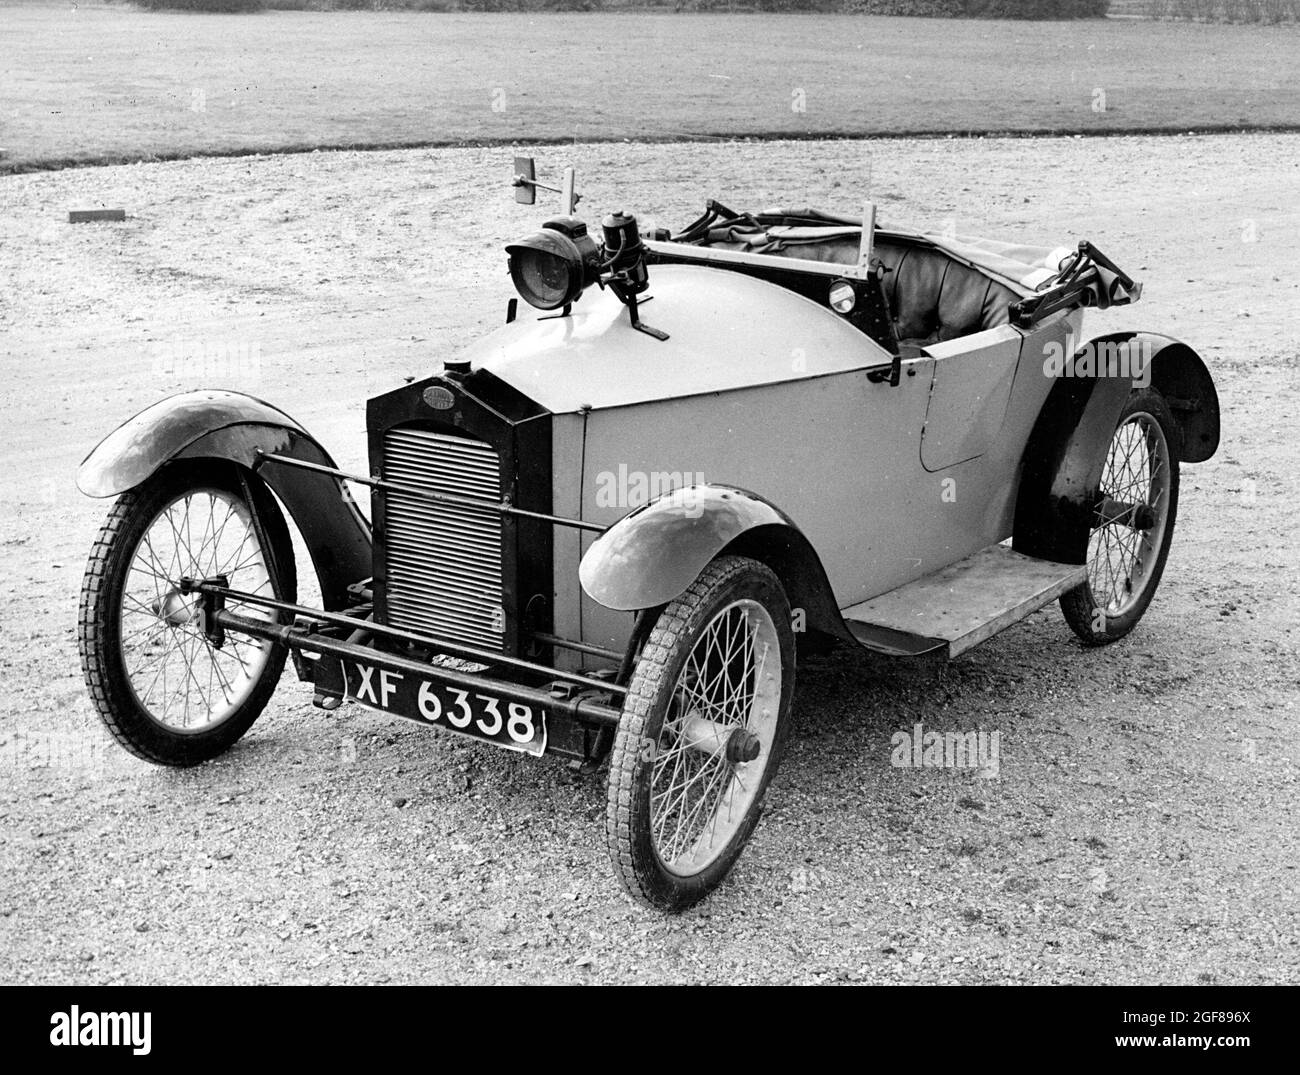 1921 Cycecar Bleriot Whippet Banque D'Images